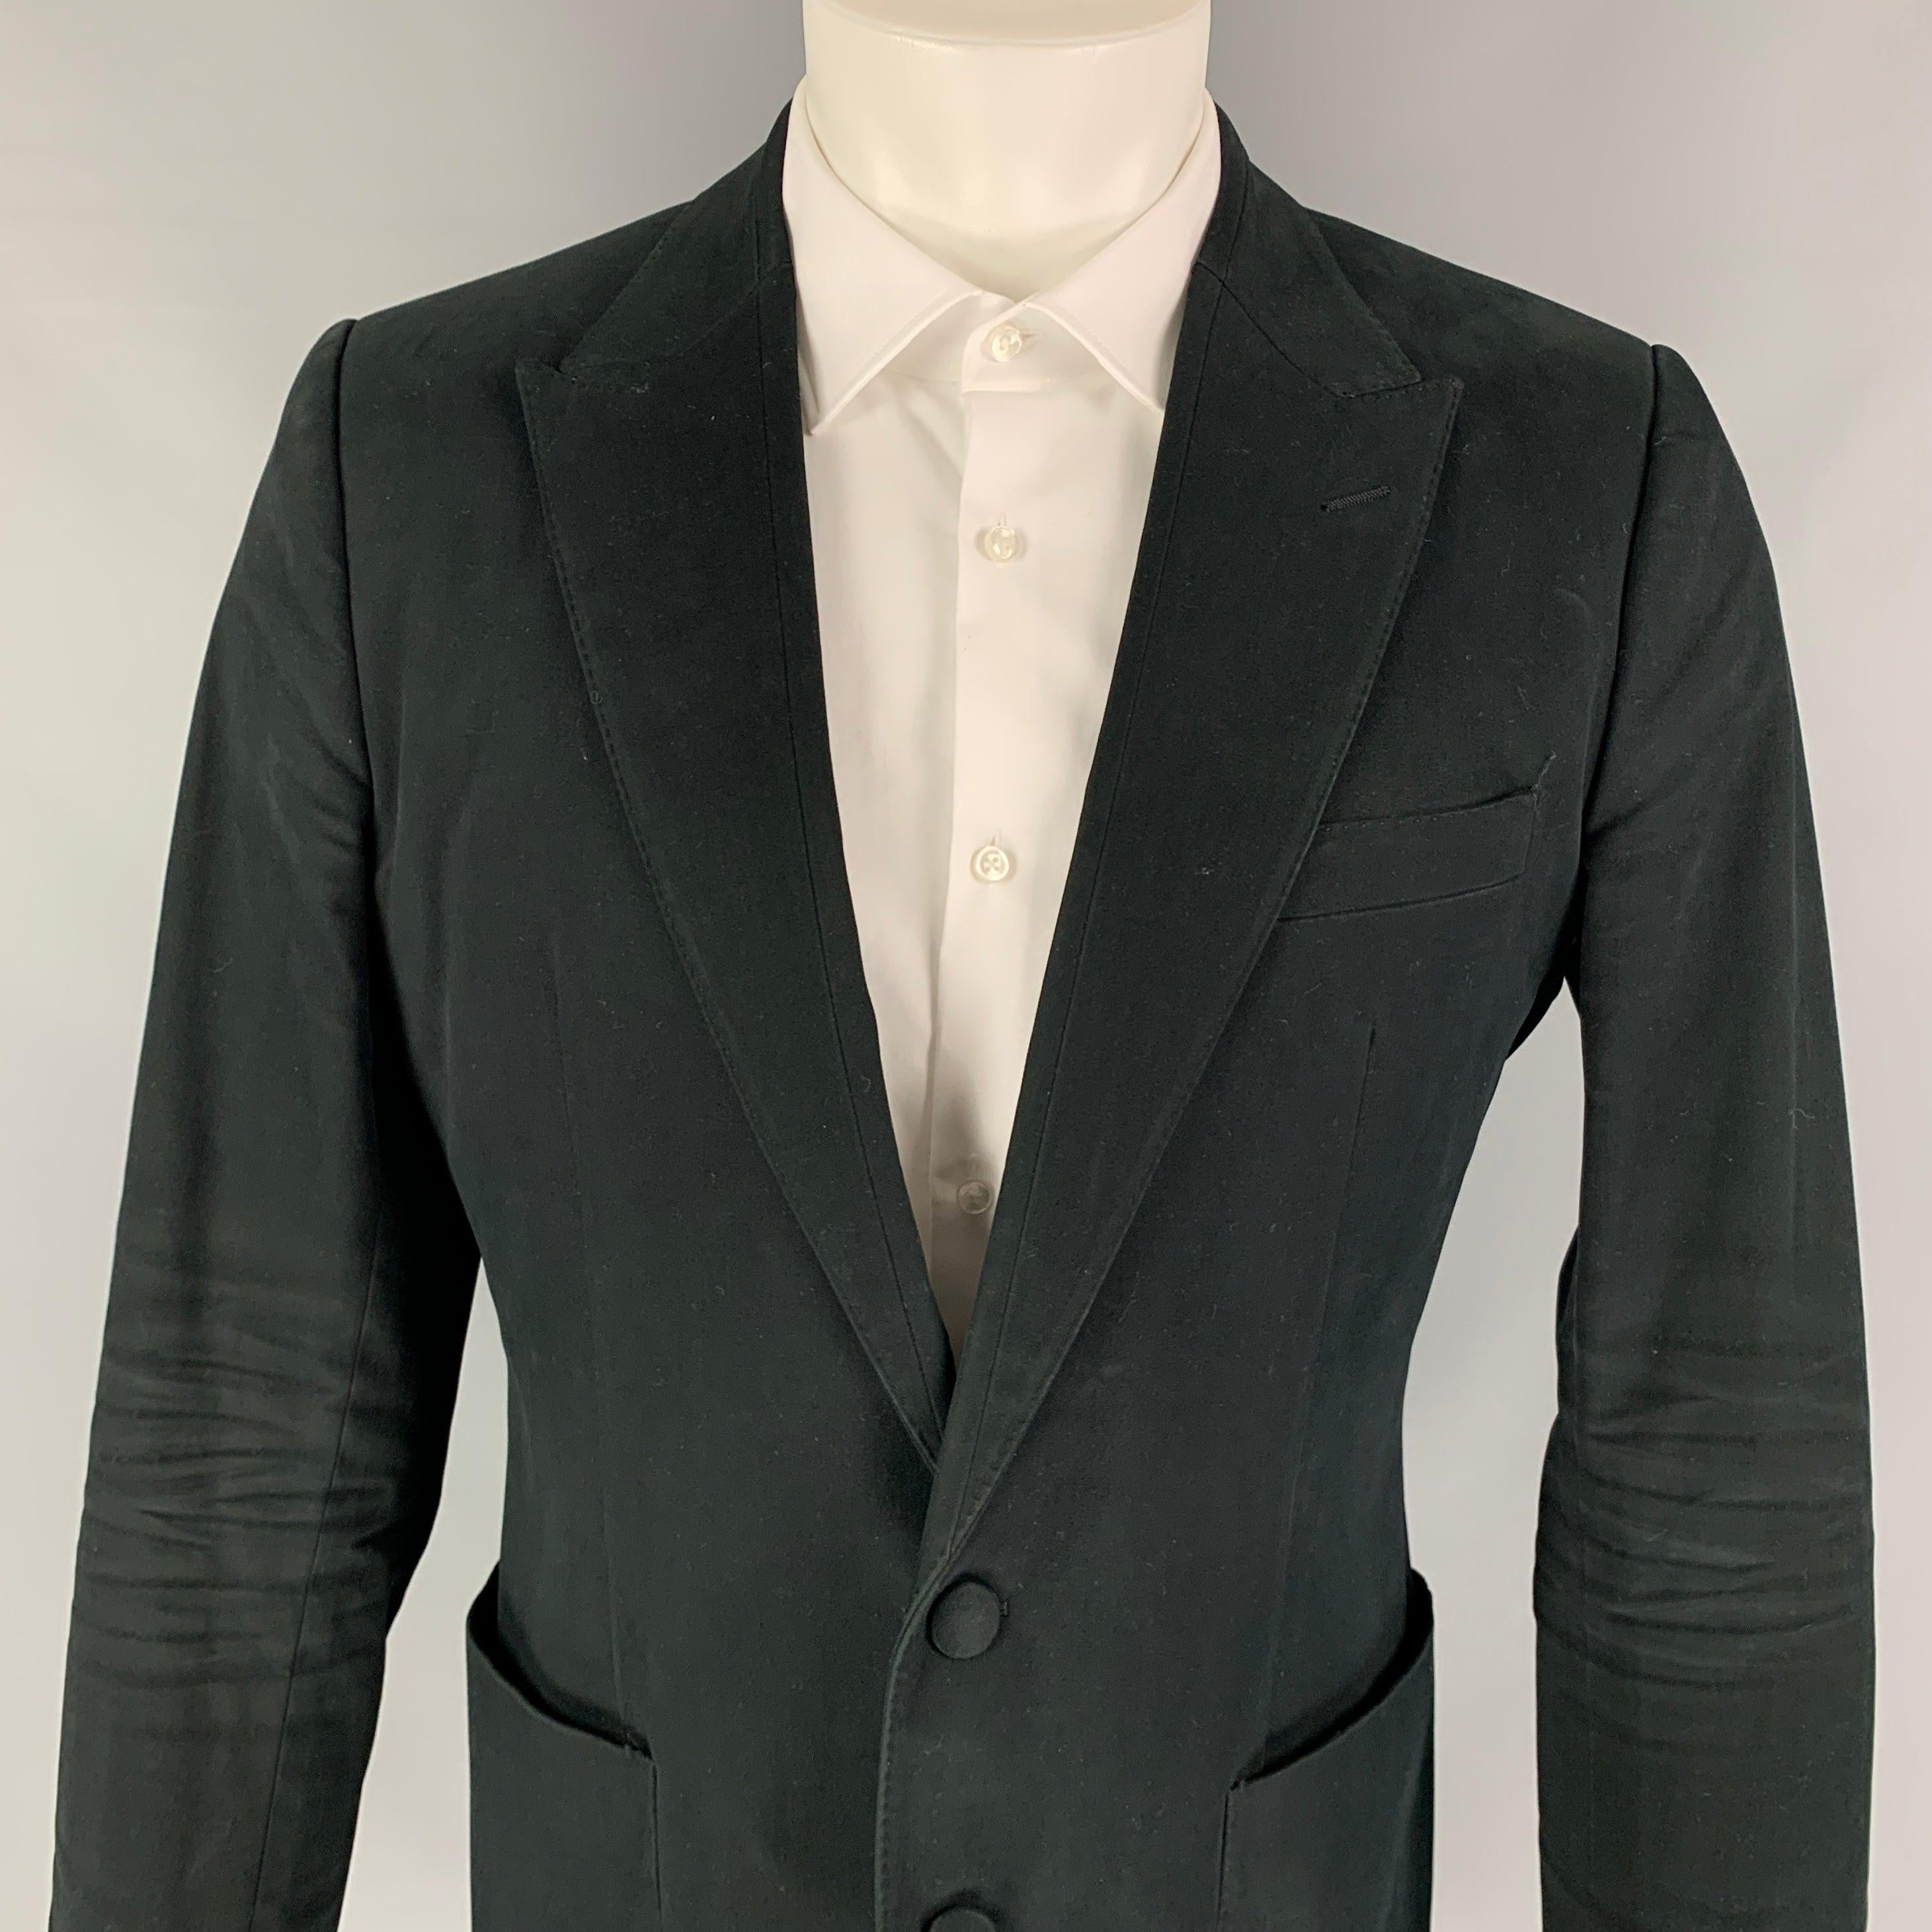 DOLCE & GABBANA sport coat comes in a black cotton with a half liner featuring a peak lapel, patch pockets, single back vent, and a double button closure. Made in Italy.
Very Good
Pre-Owned Condition. 

Marked:   50 

Measurements: 
 
Shoulder: 17.5